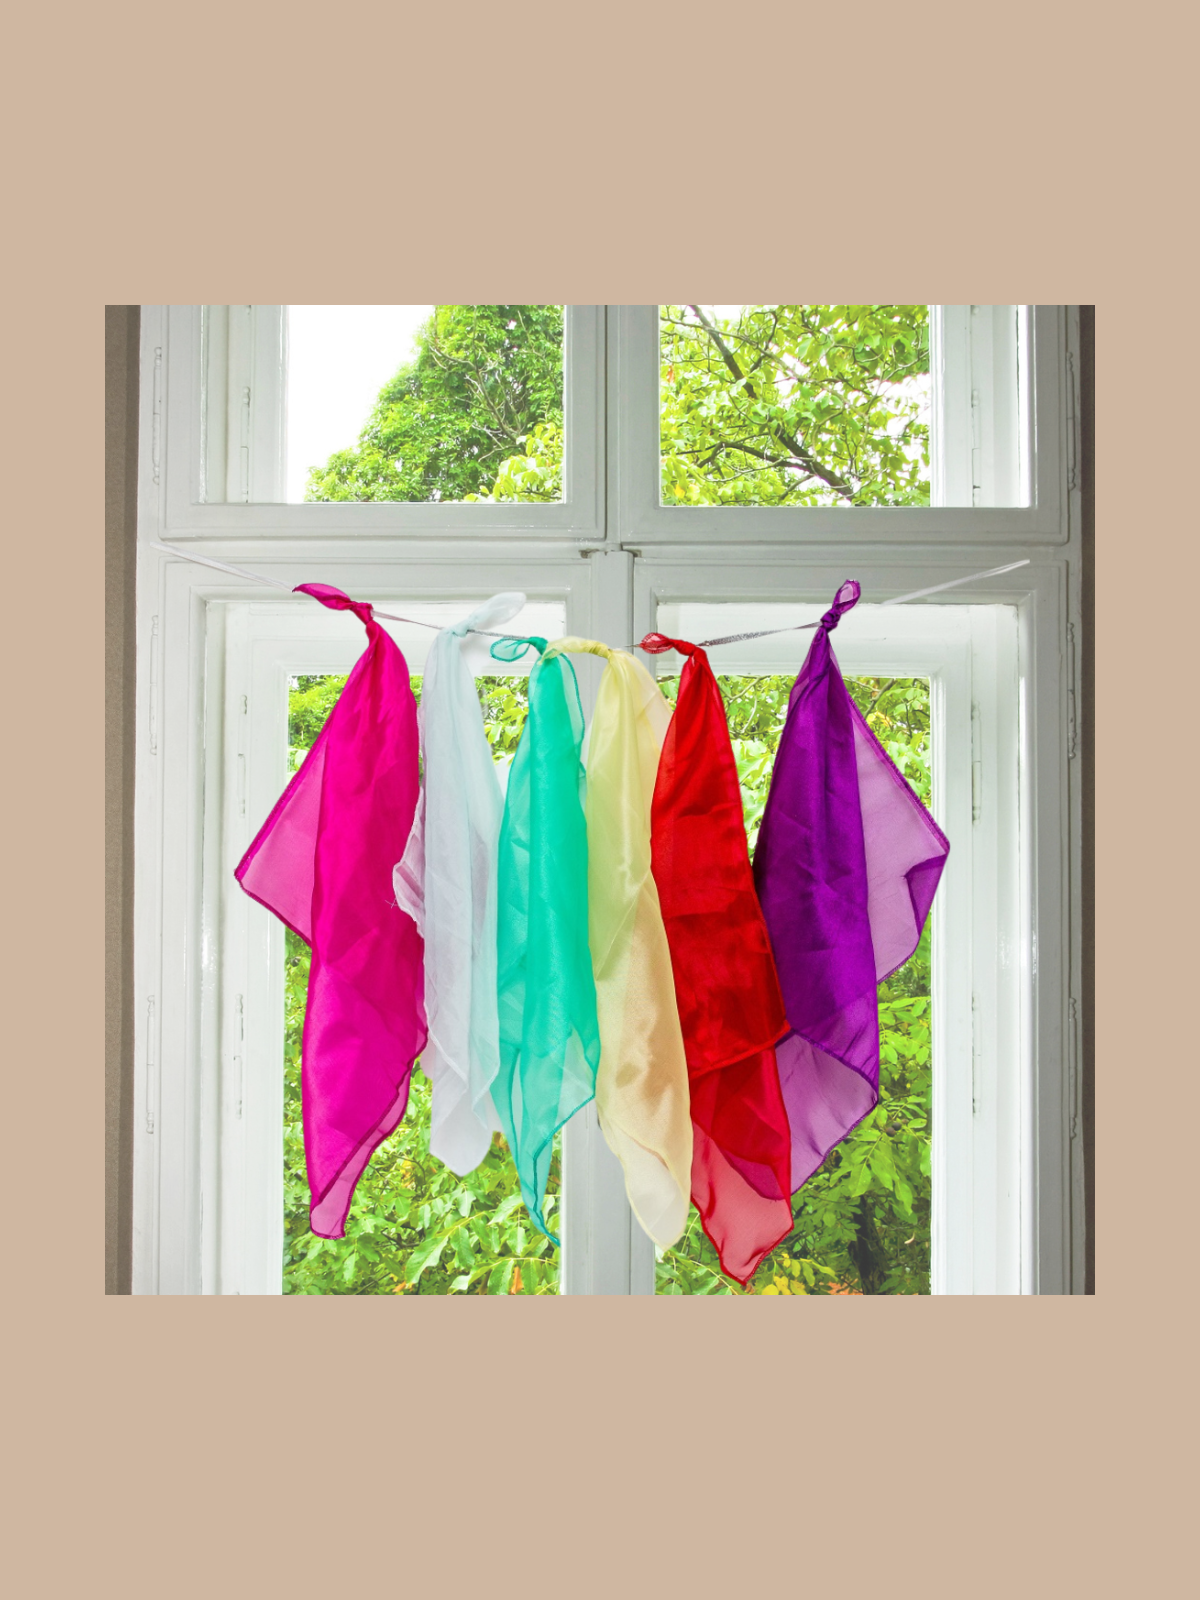 Sensory Play Scarves - Organza scarves - set of 7 Waldorf Inspired play scarves (colors may vary)